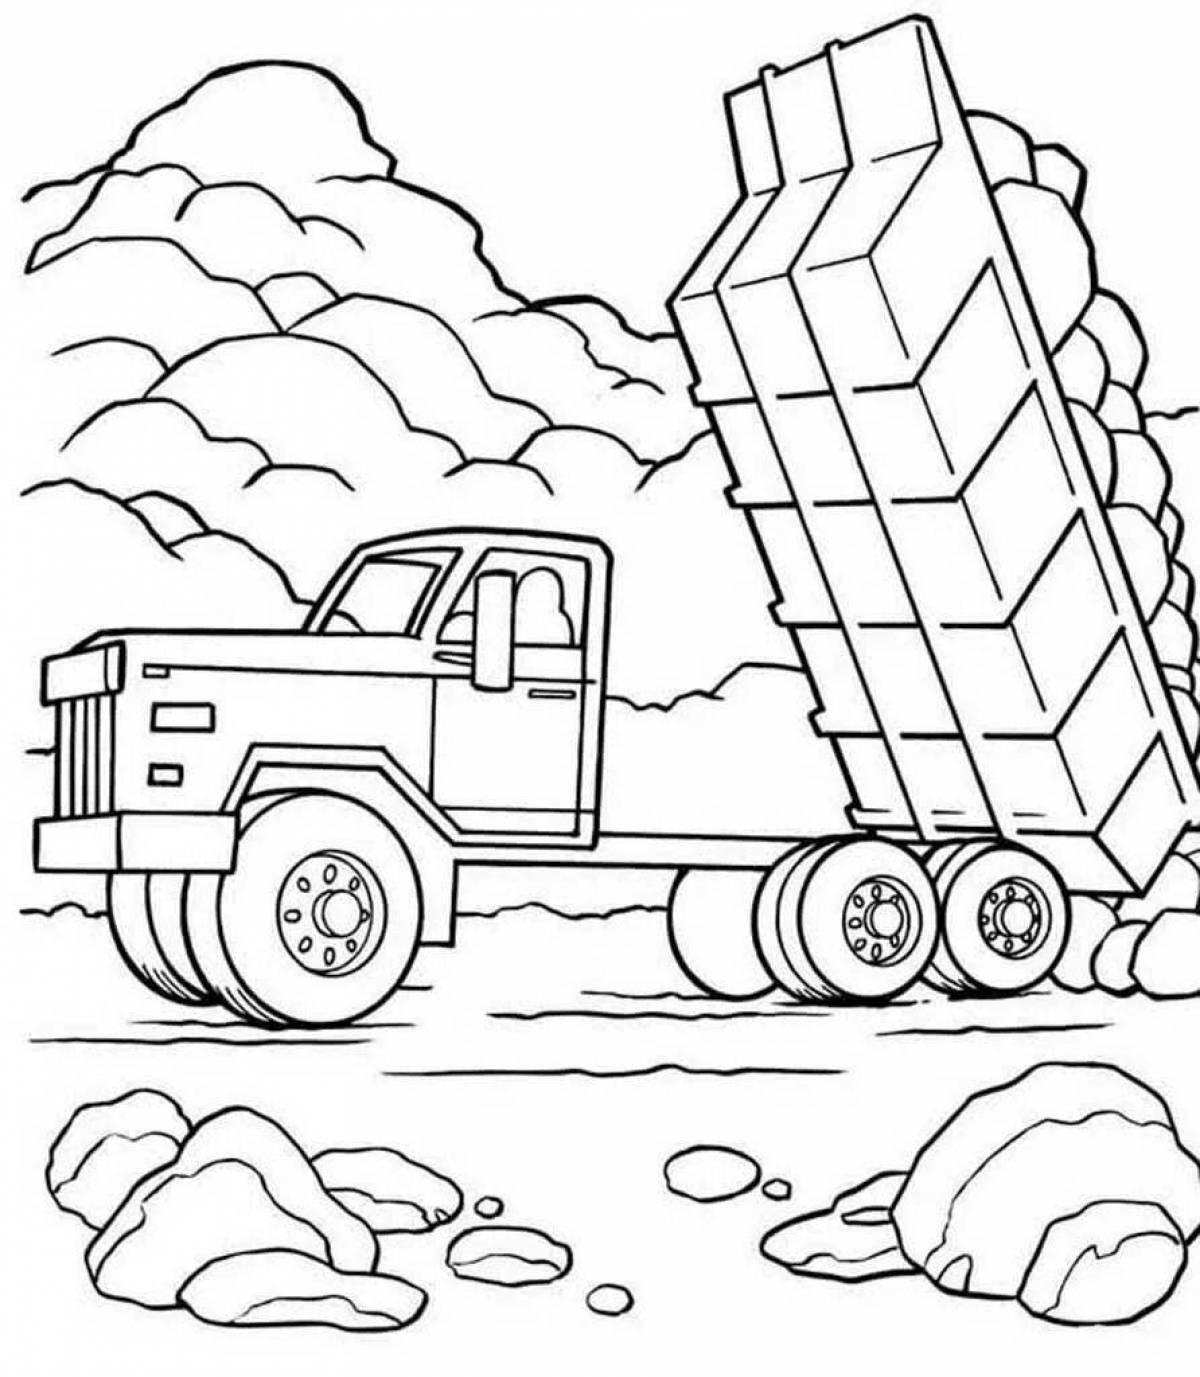 Grand Kamaz dump truck coloring page